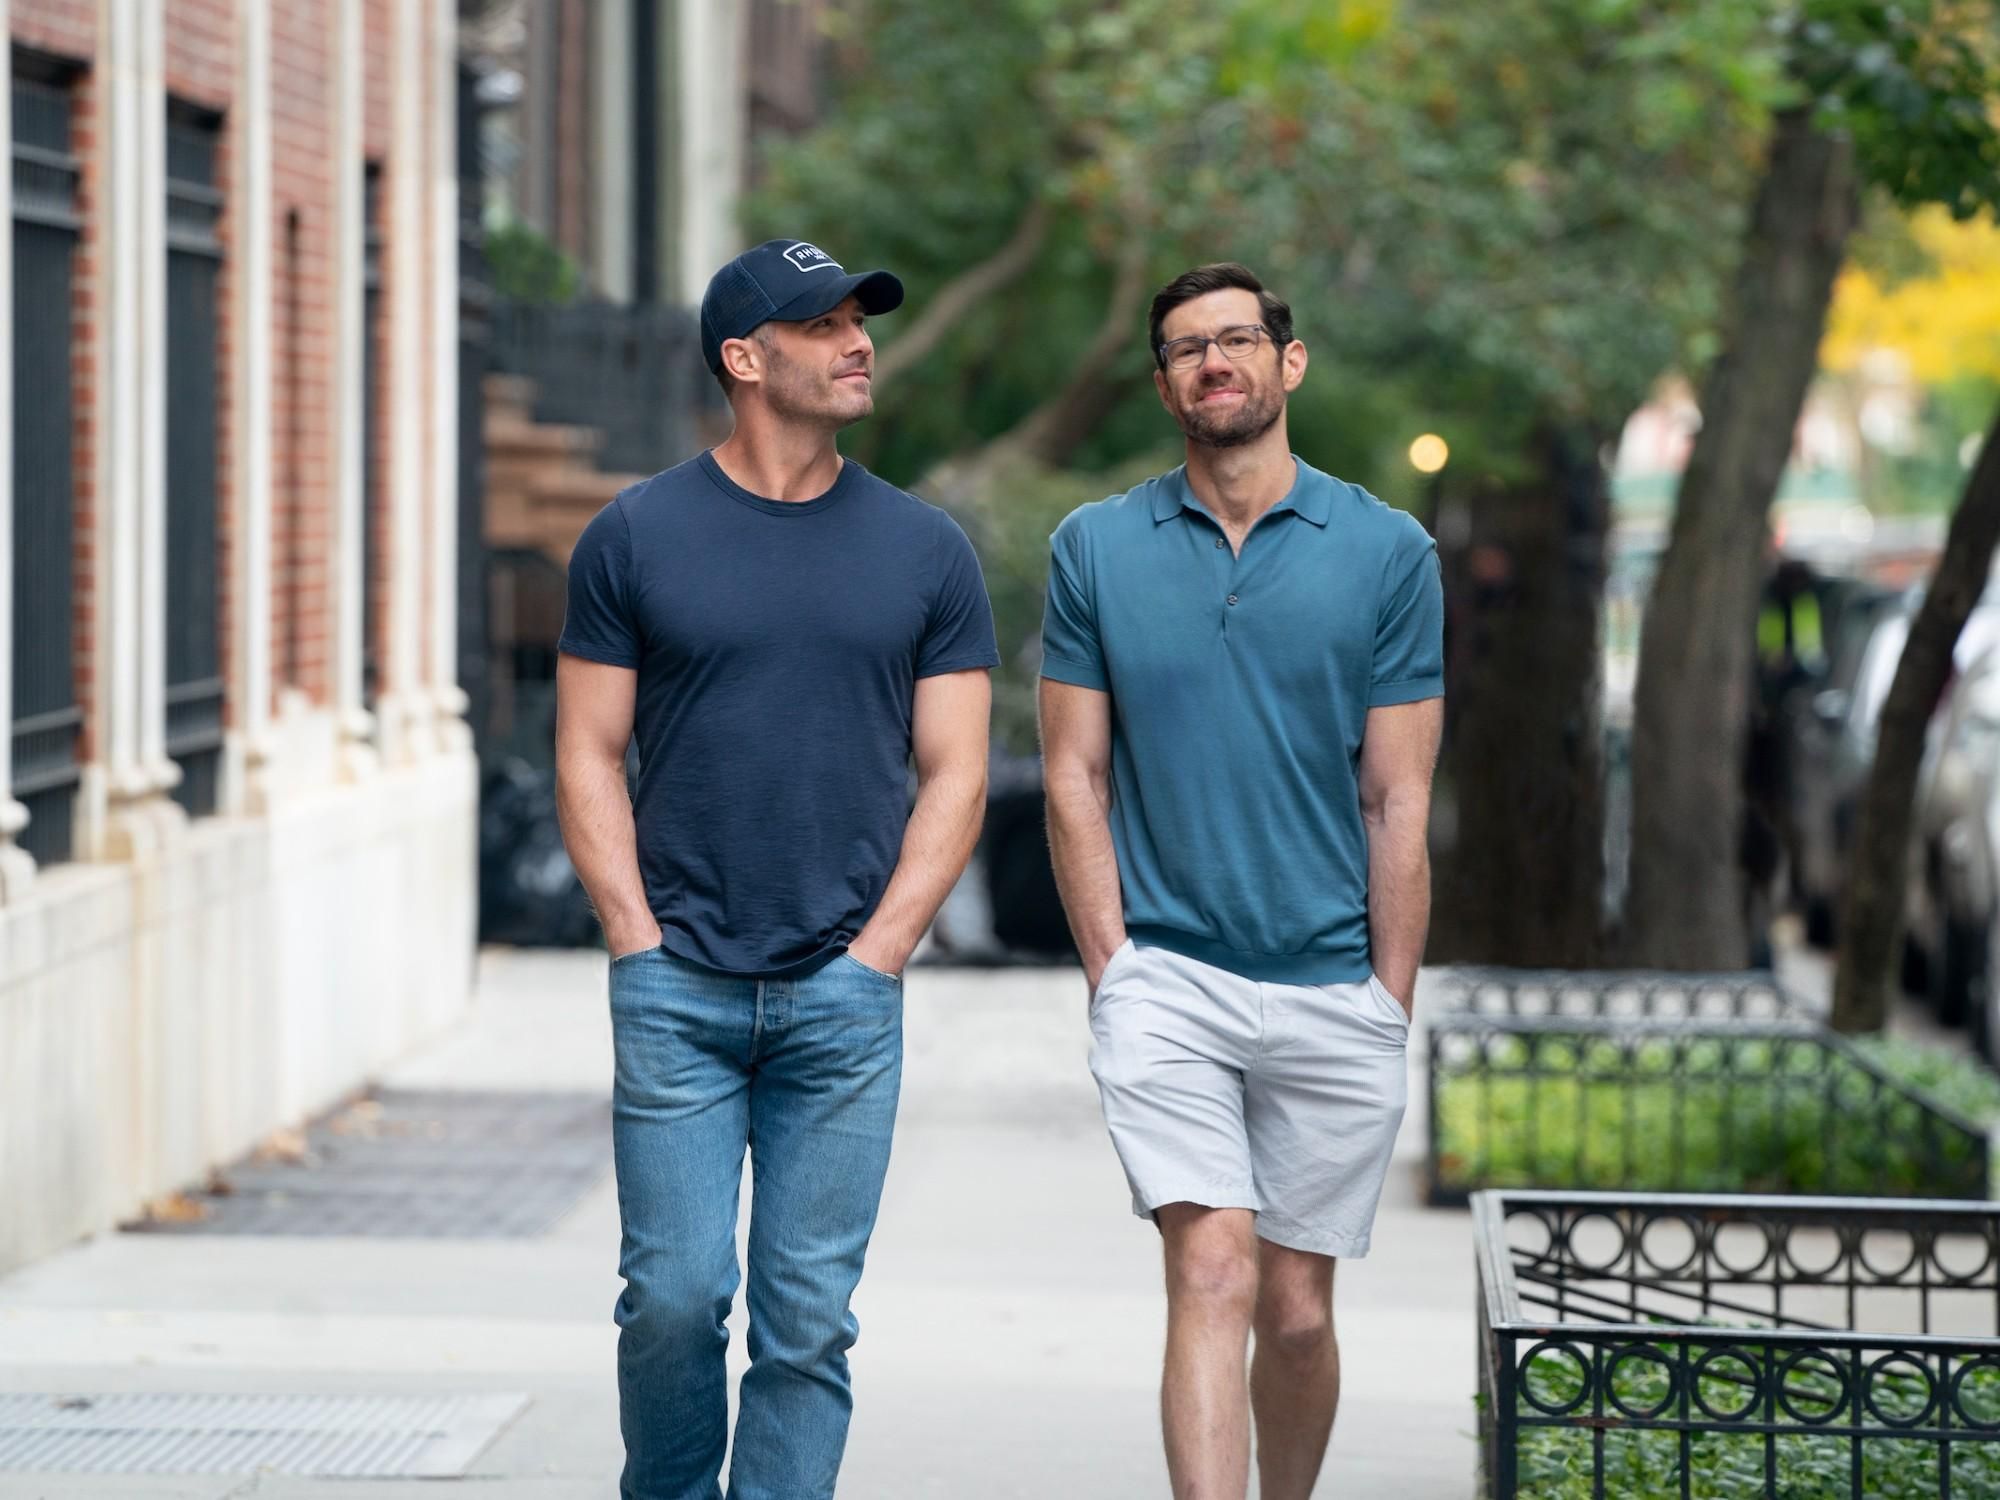 Groundbreaking gay rom com Bros puts successful new spin on classic genre